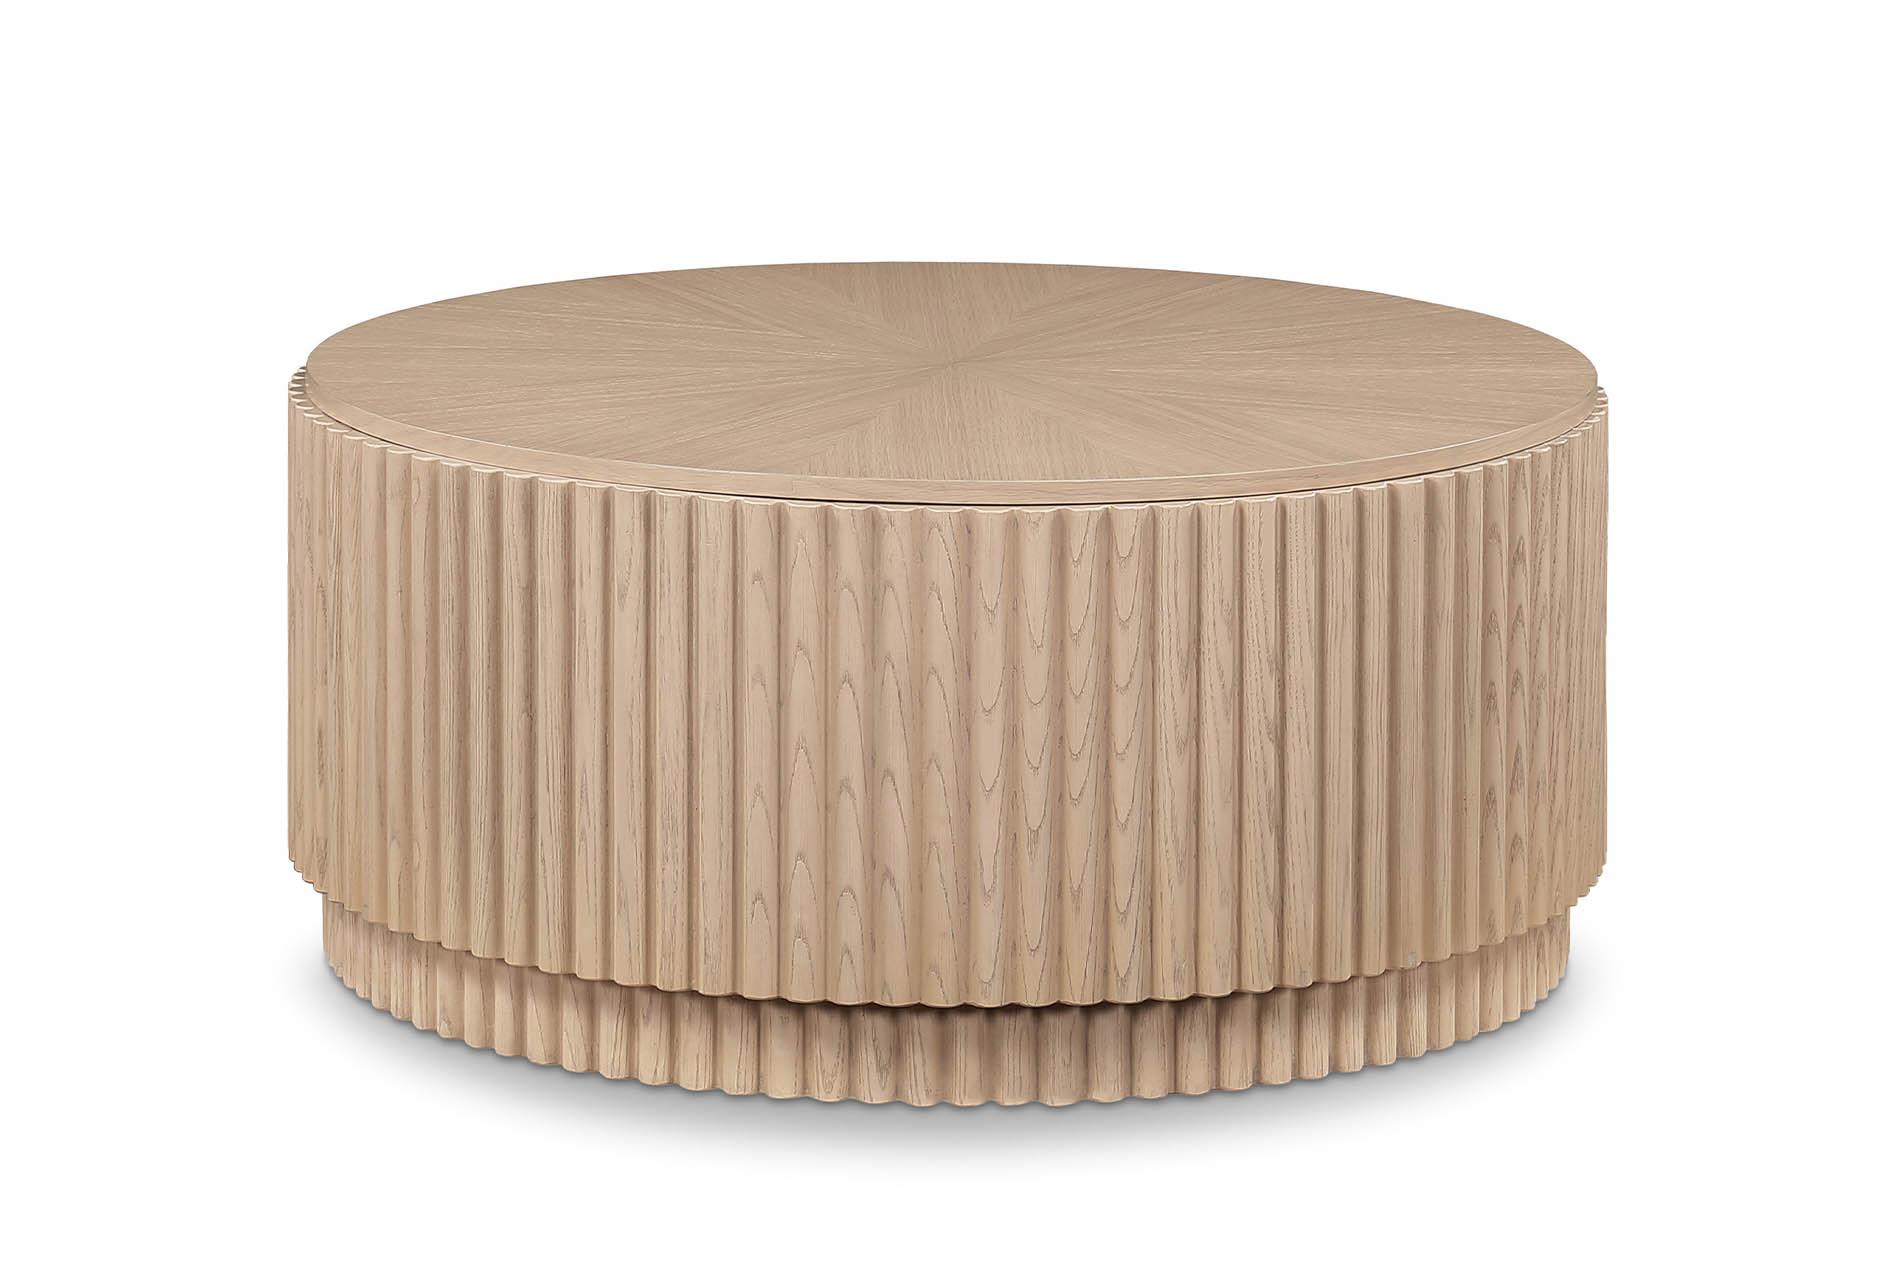 Contemporary, Modern Coffee Table 99055Oak-CT 99055Oak-CT in Natural 